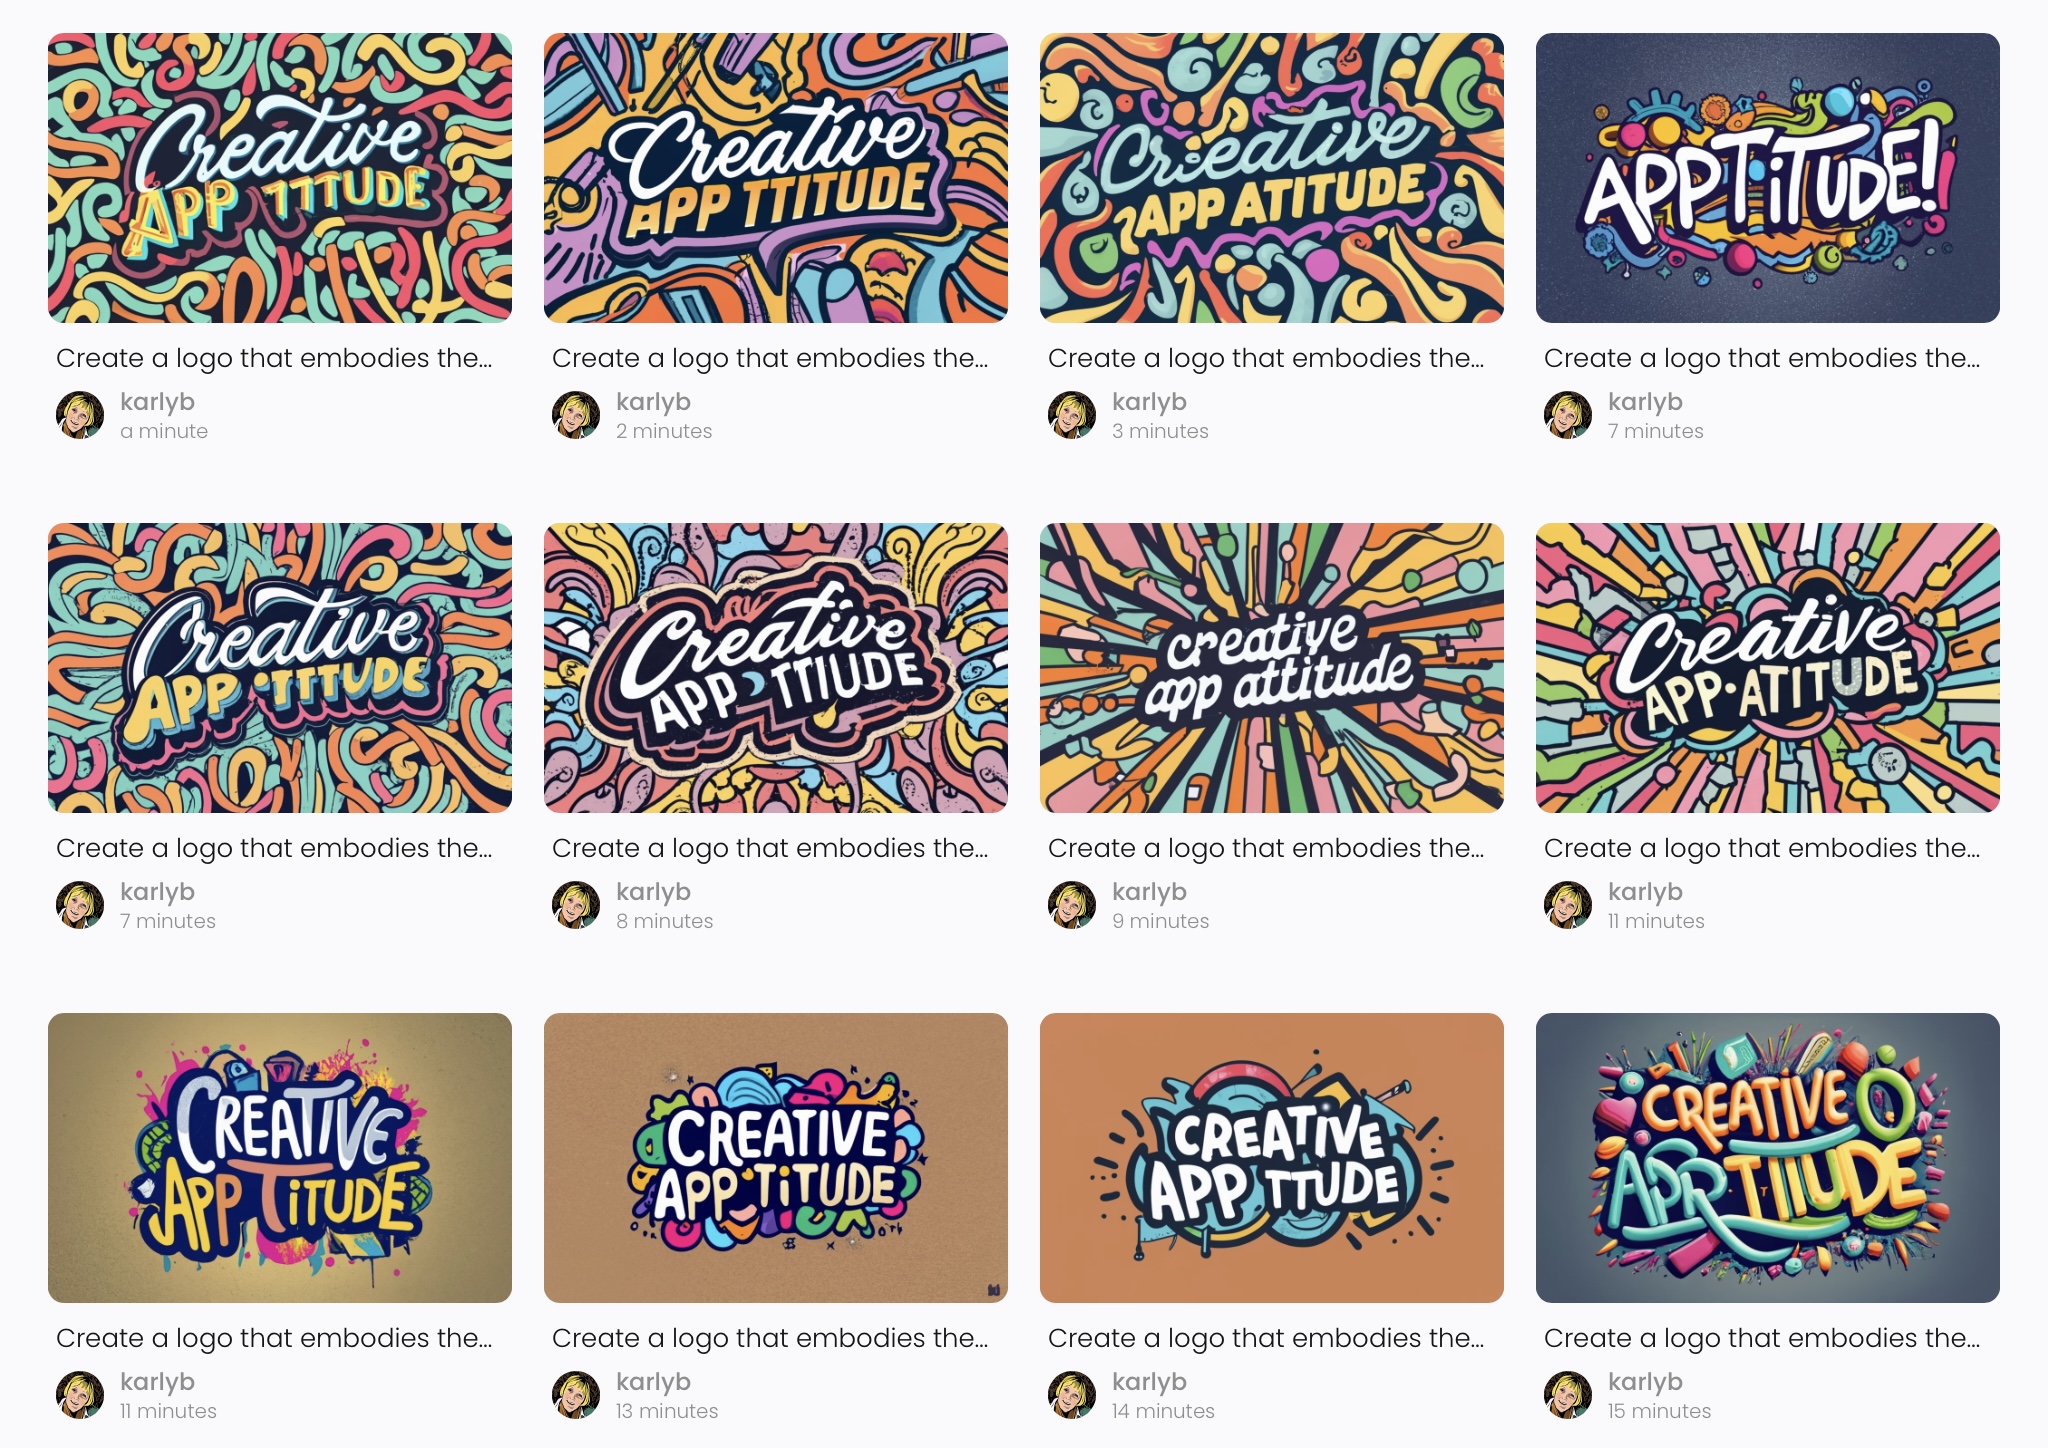 examples of logo "Creative APPtitude" with many misspelled